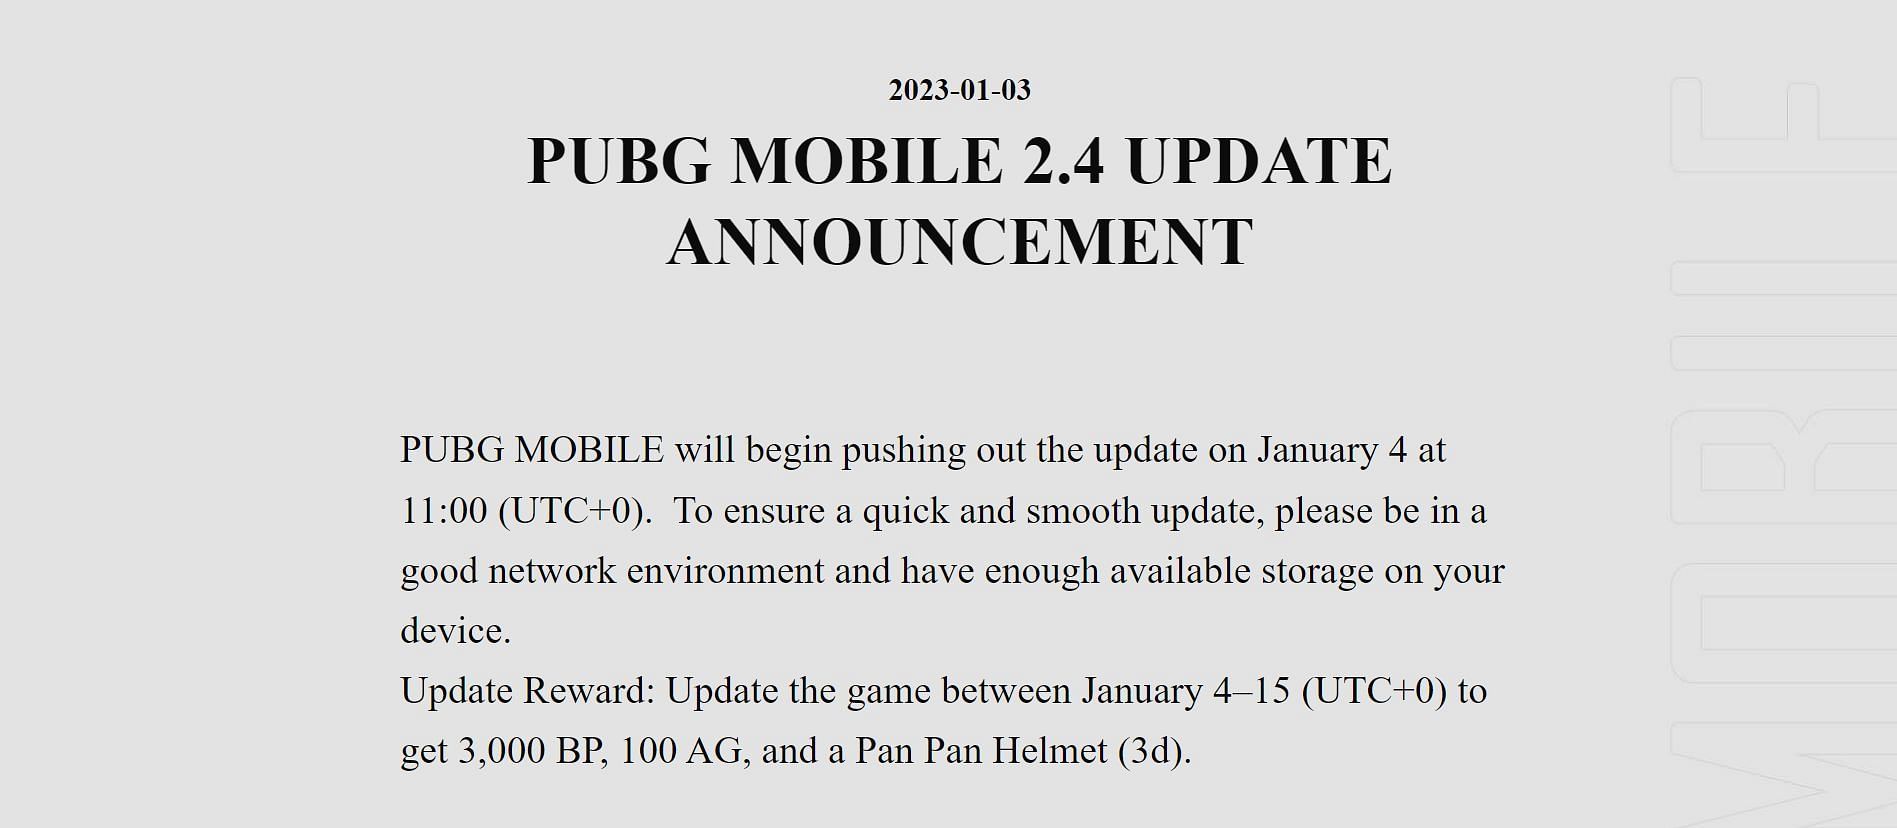 You will receive free rewards after downloading PUBG Mobile 2.4 update (Image via Krafton)